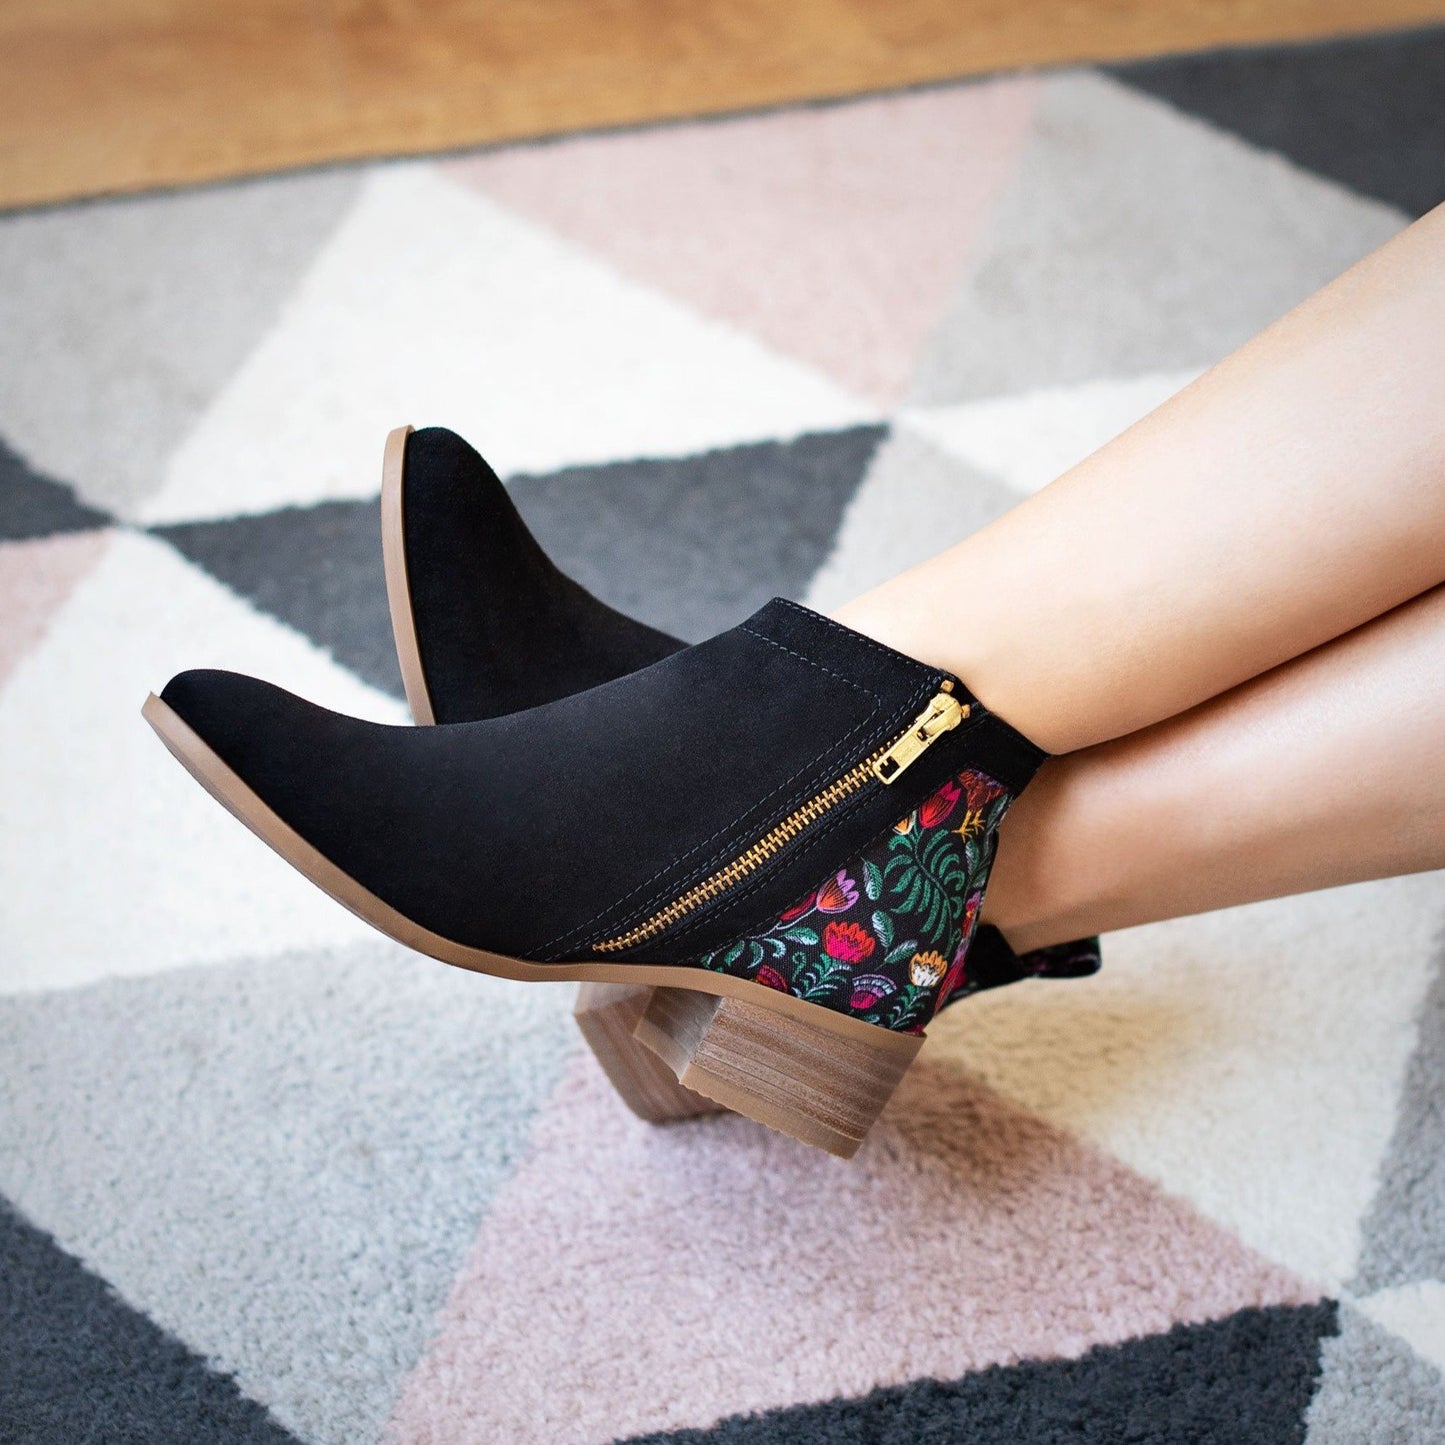 Rooster Bootie